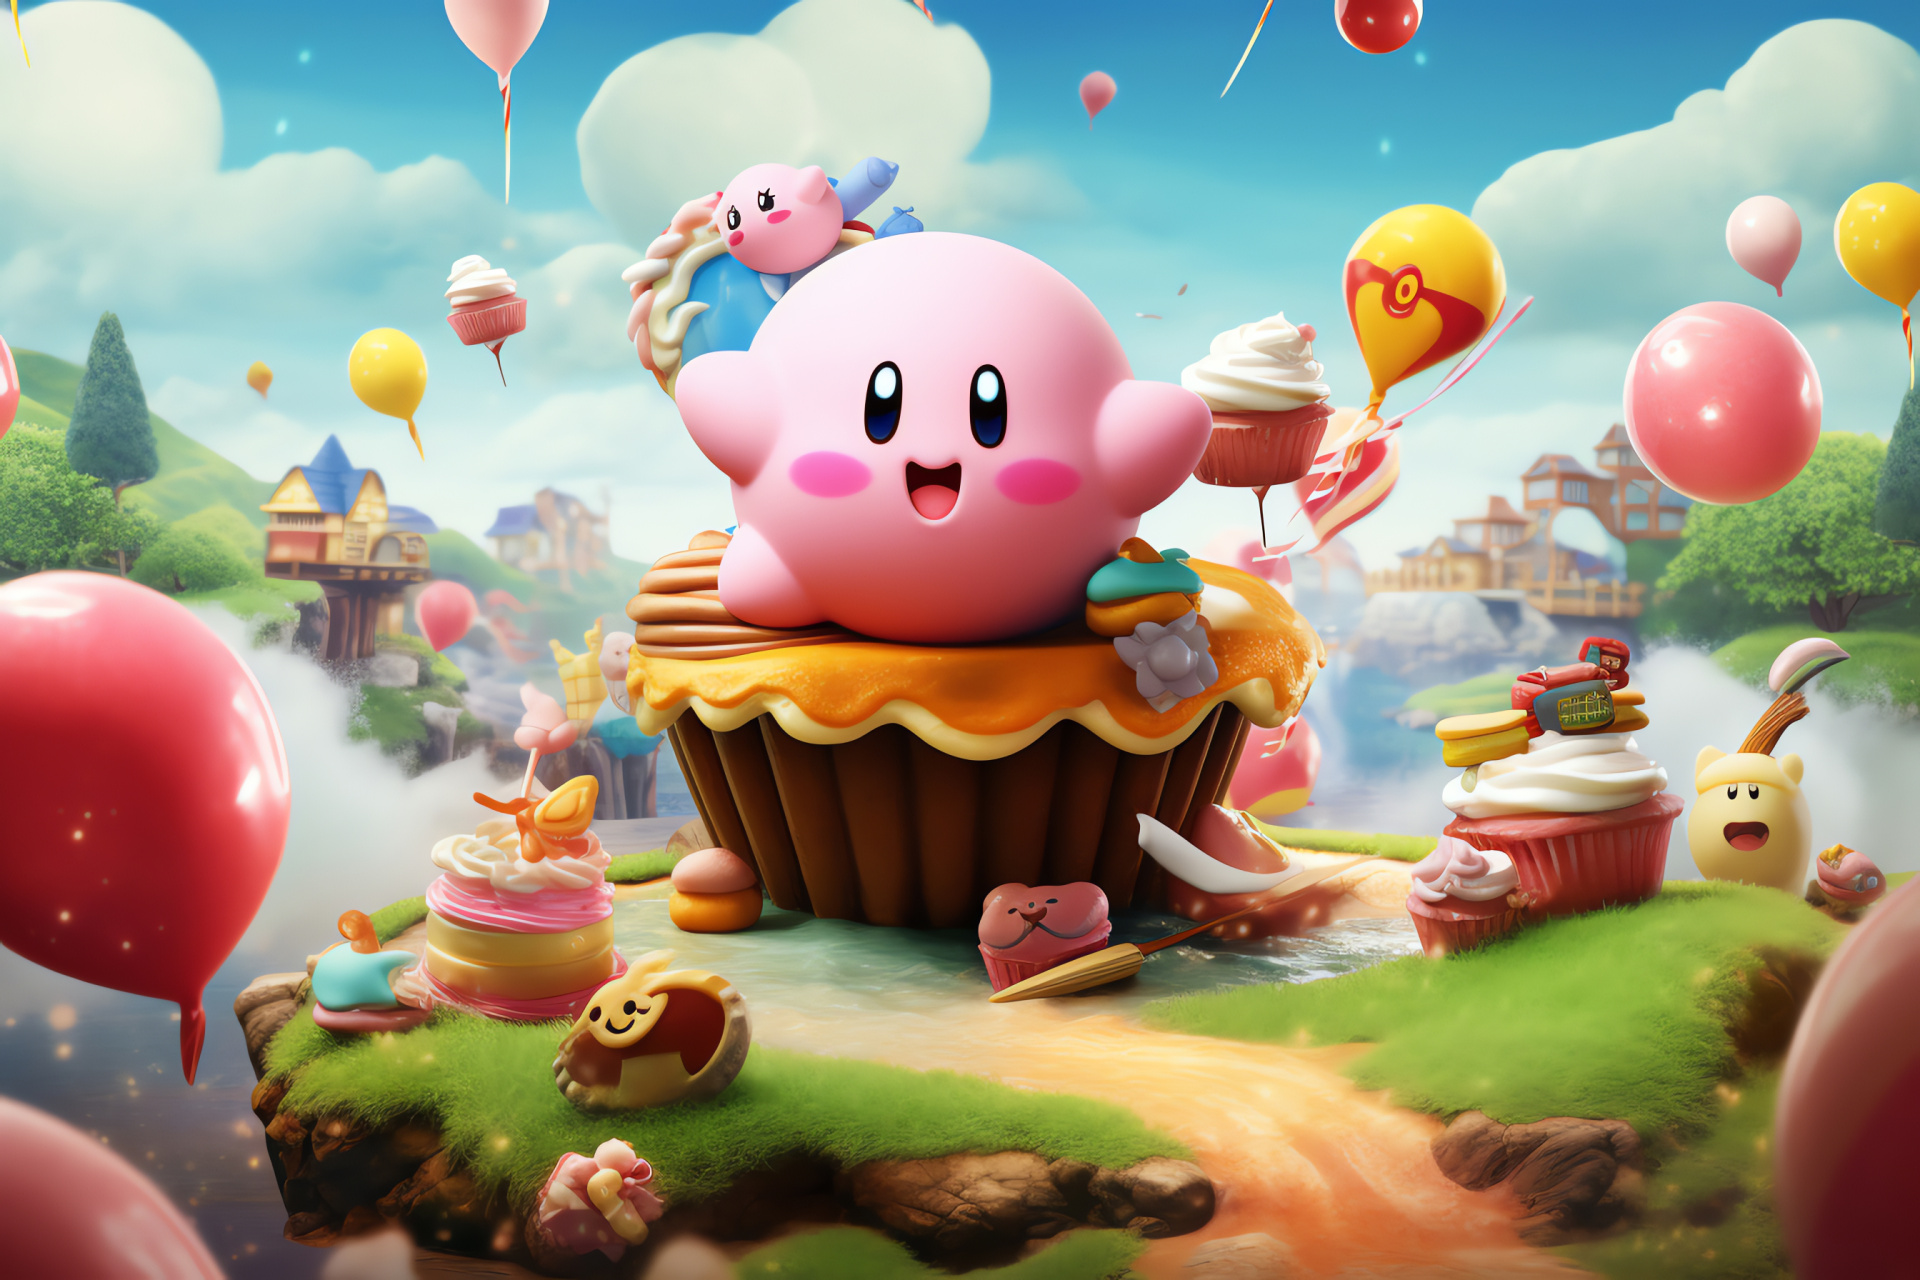 Nintendo celebration, Kirby of Dream Land, Pink puffball, Floating above joy, Whimsical character, HD Desktop Image